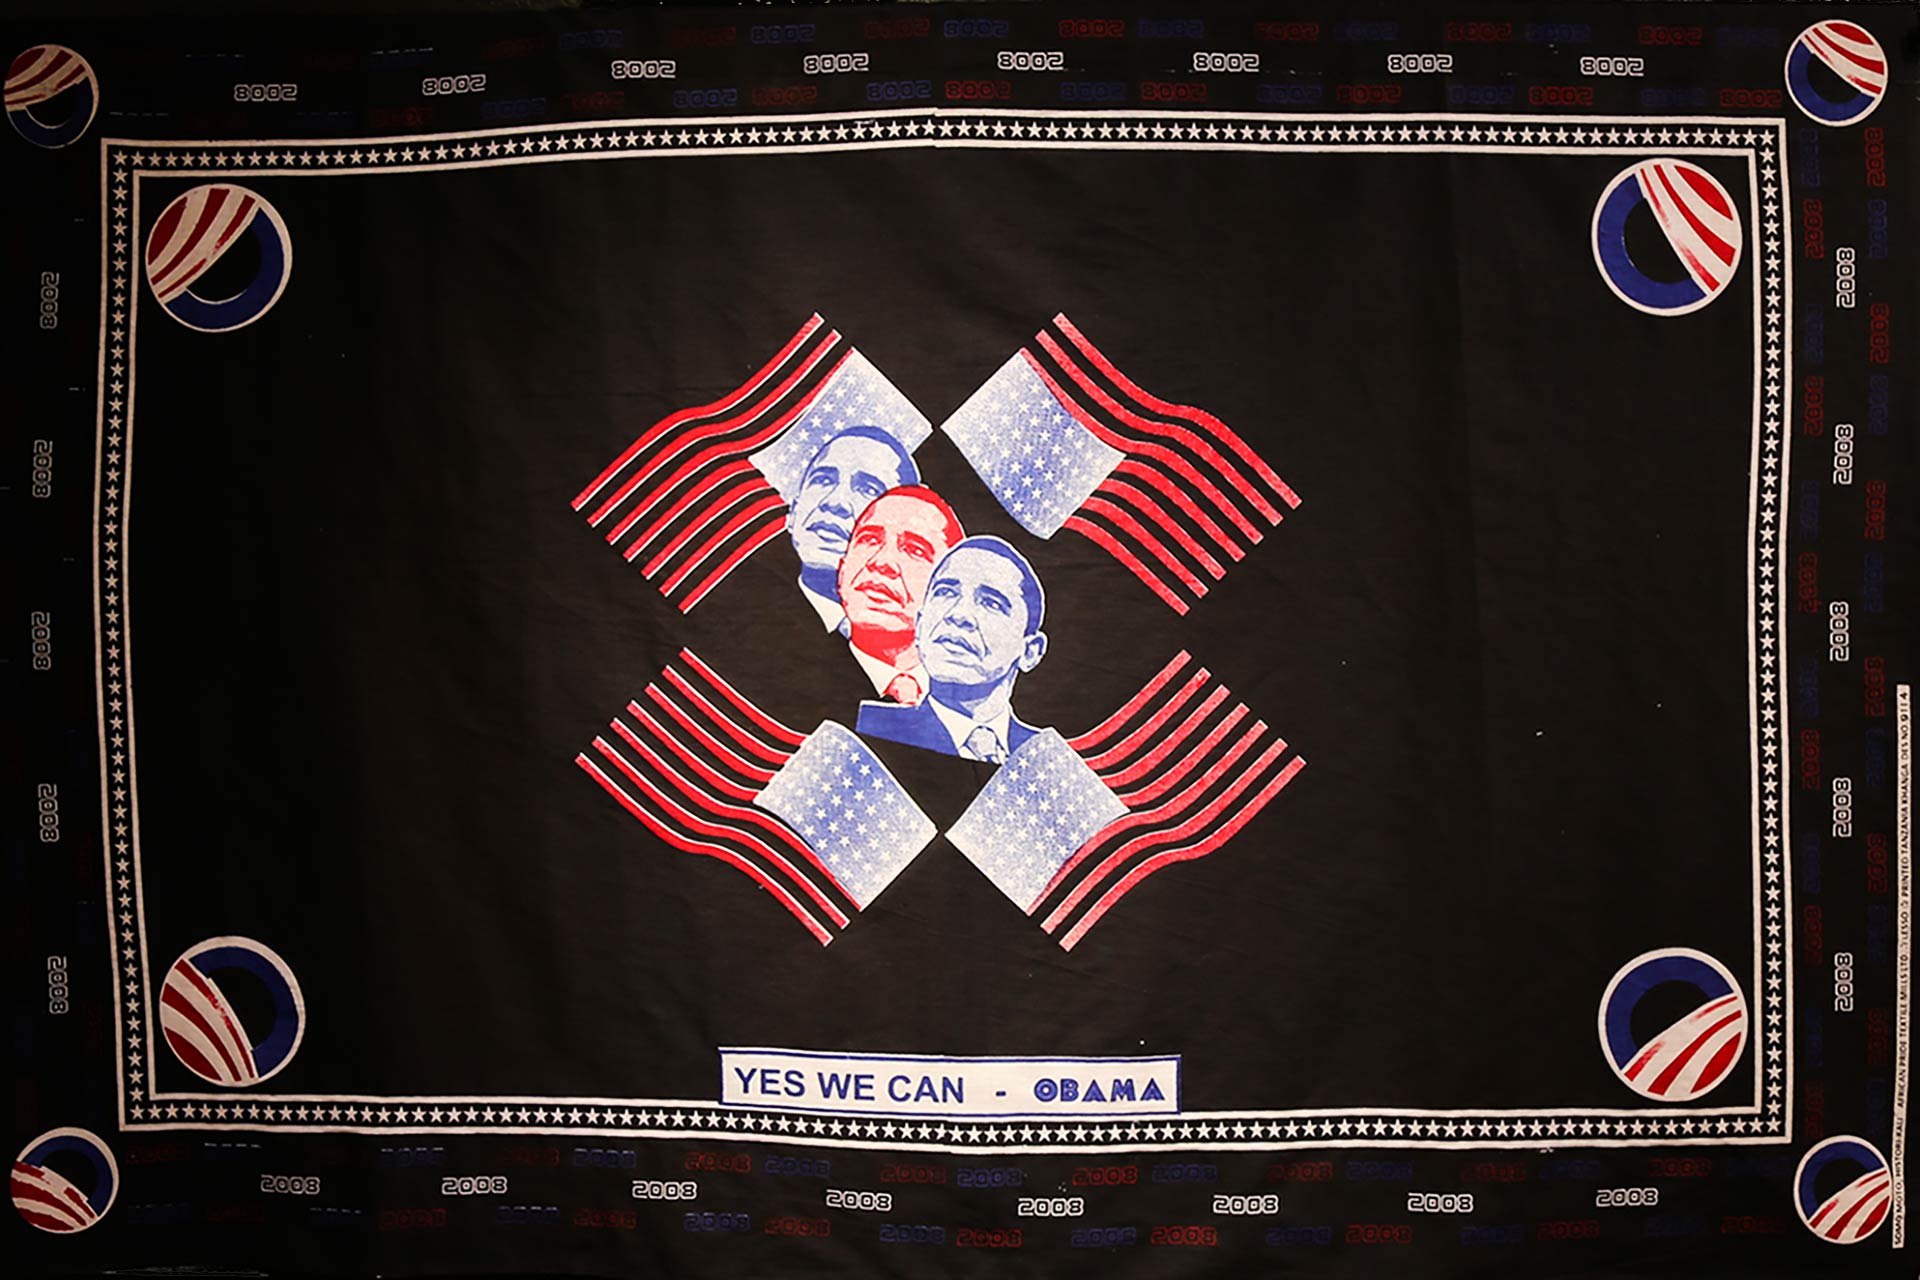 Obama flag with a label 'yes we can'